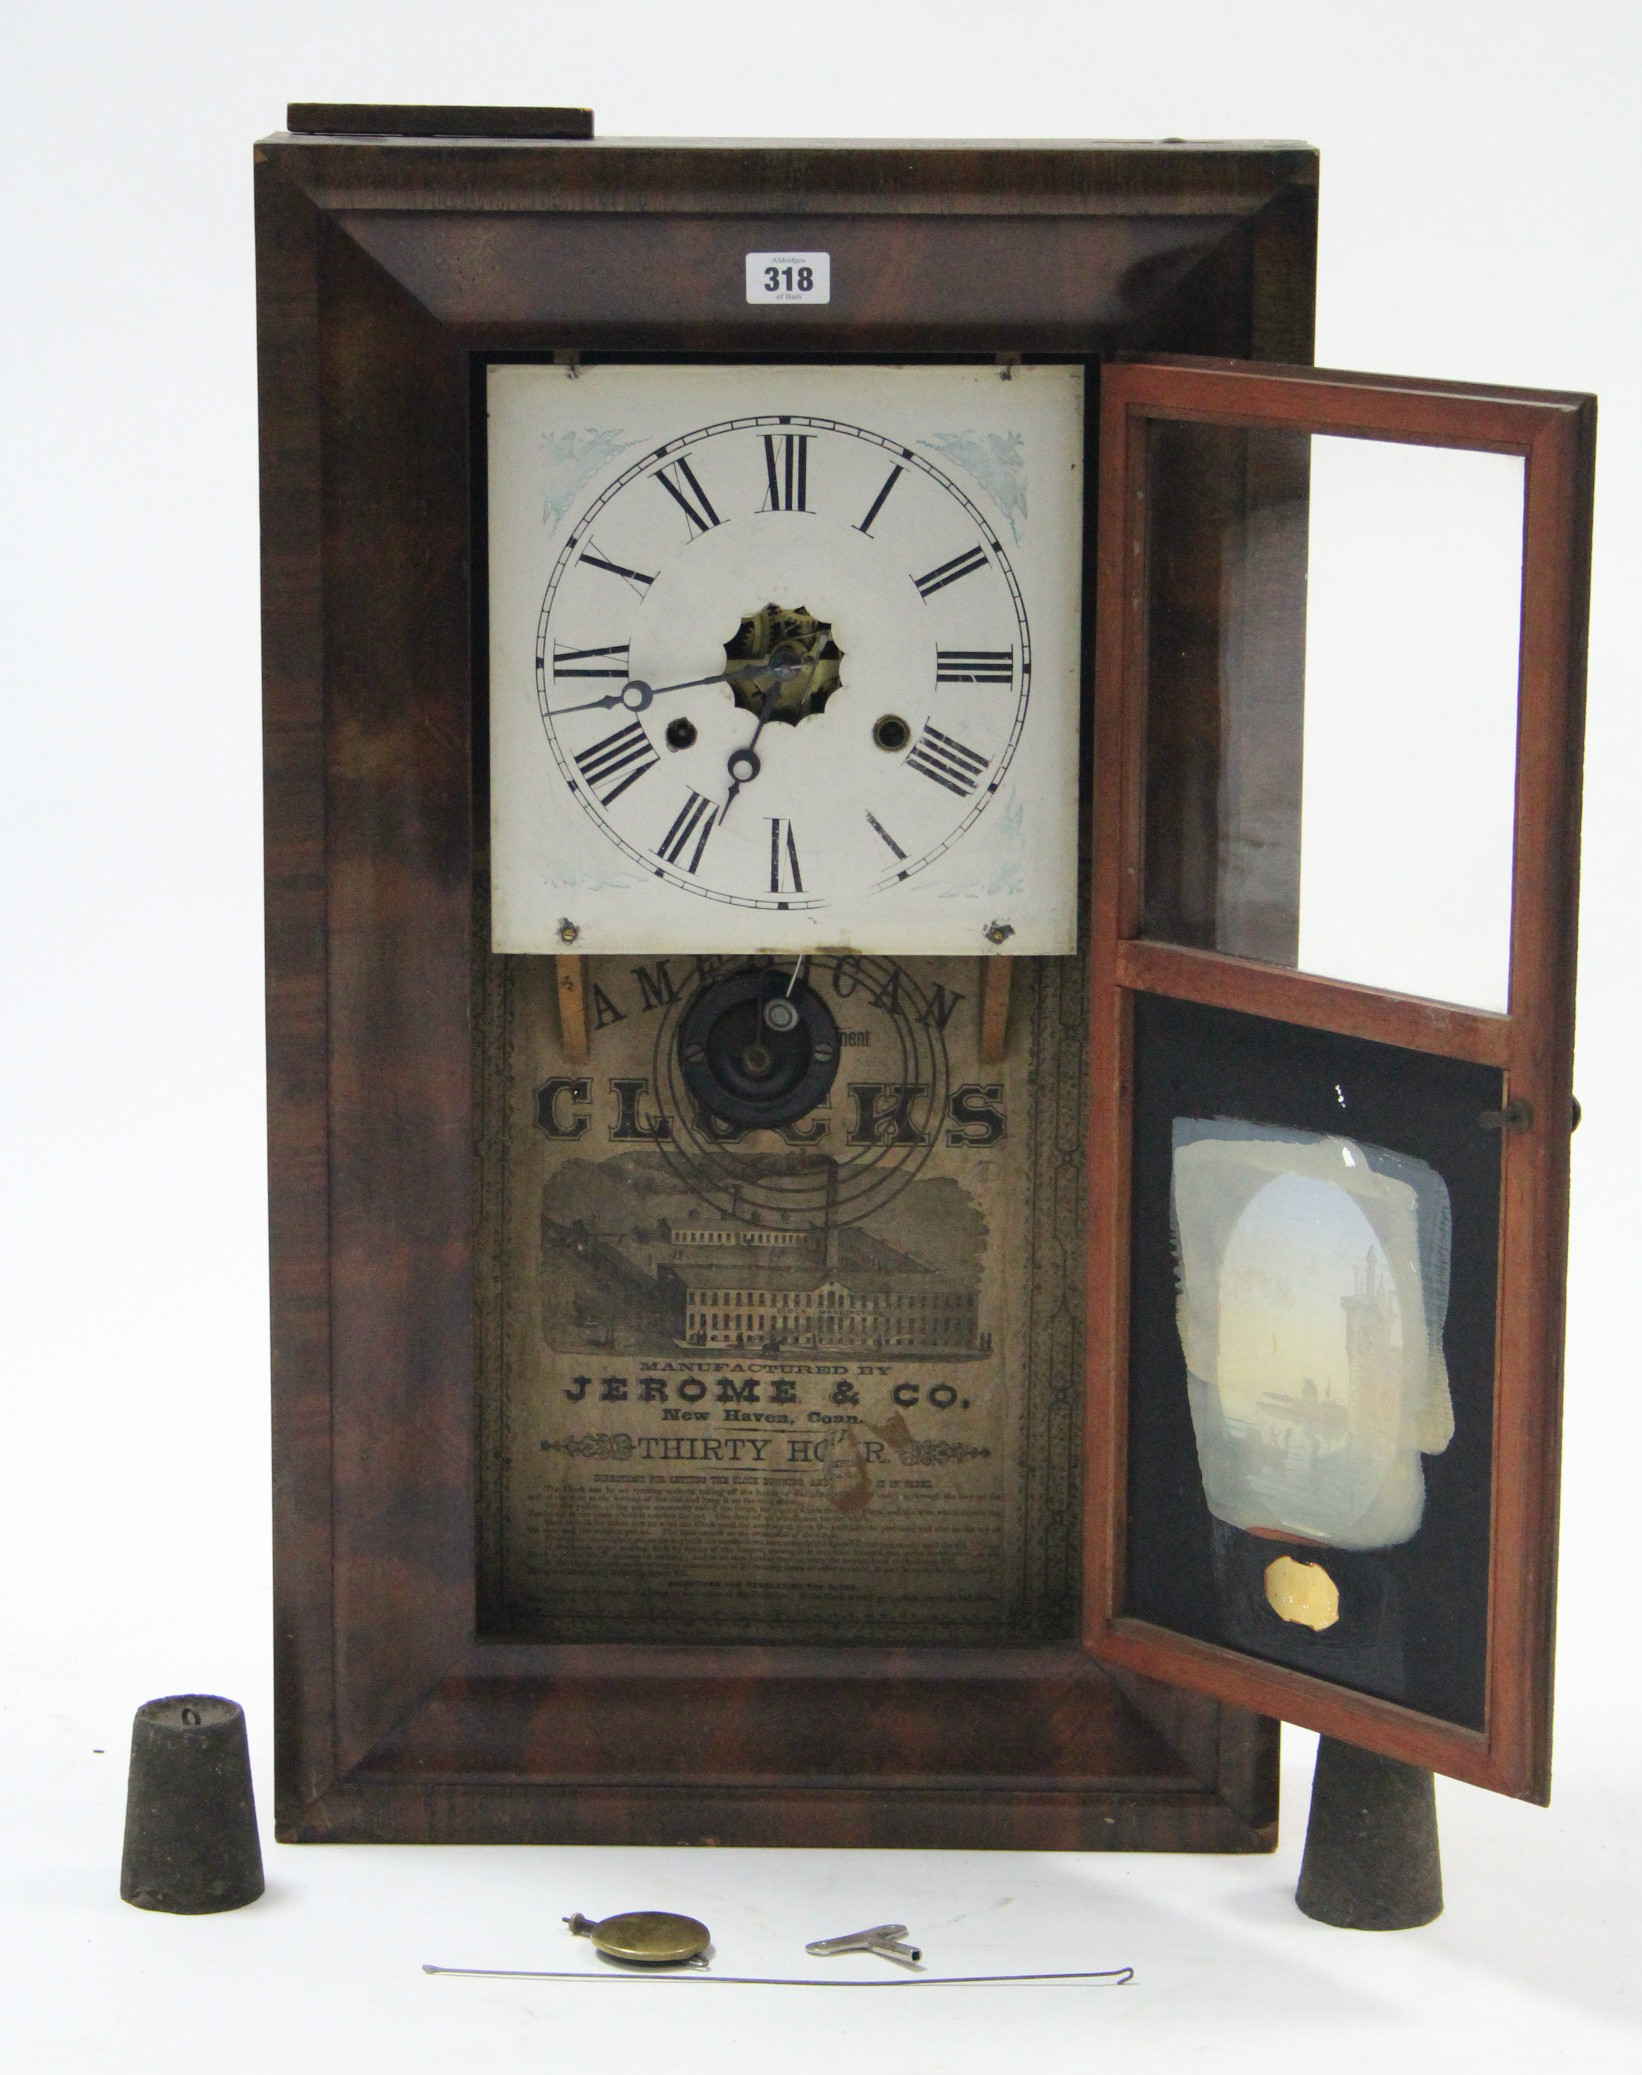 A late 19th century American thirty hour wall clock by Jerome & Co. of New Haven, with pictorial - Image 2 of 3